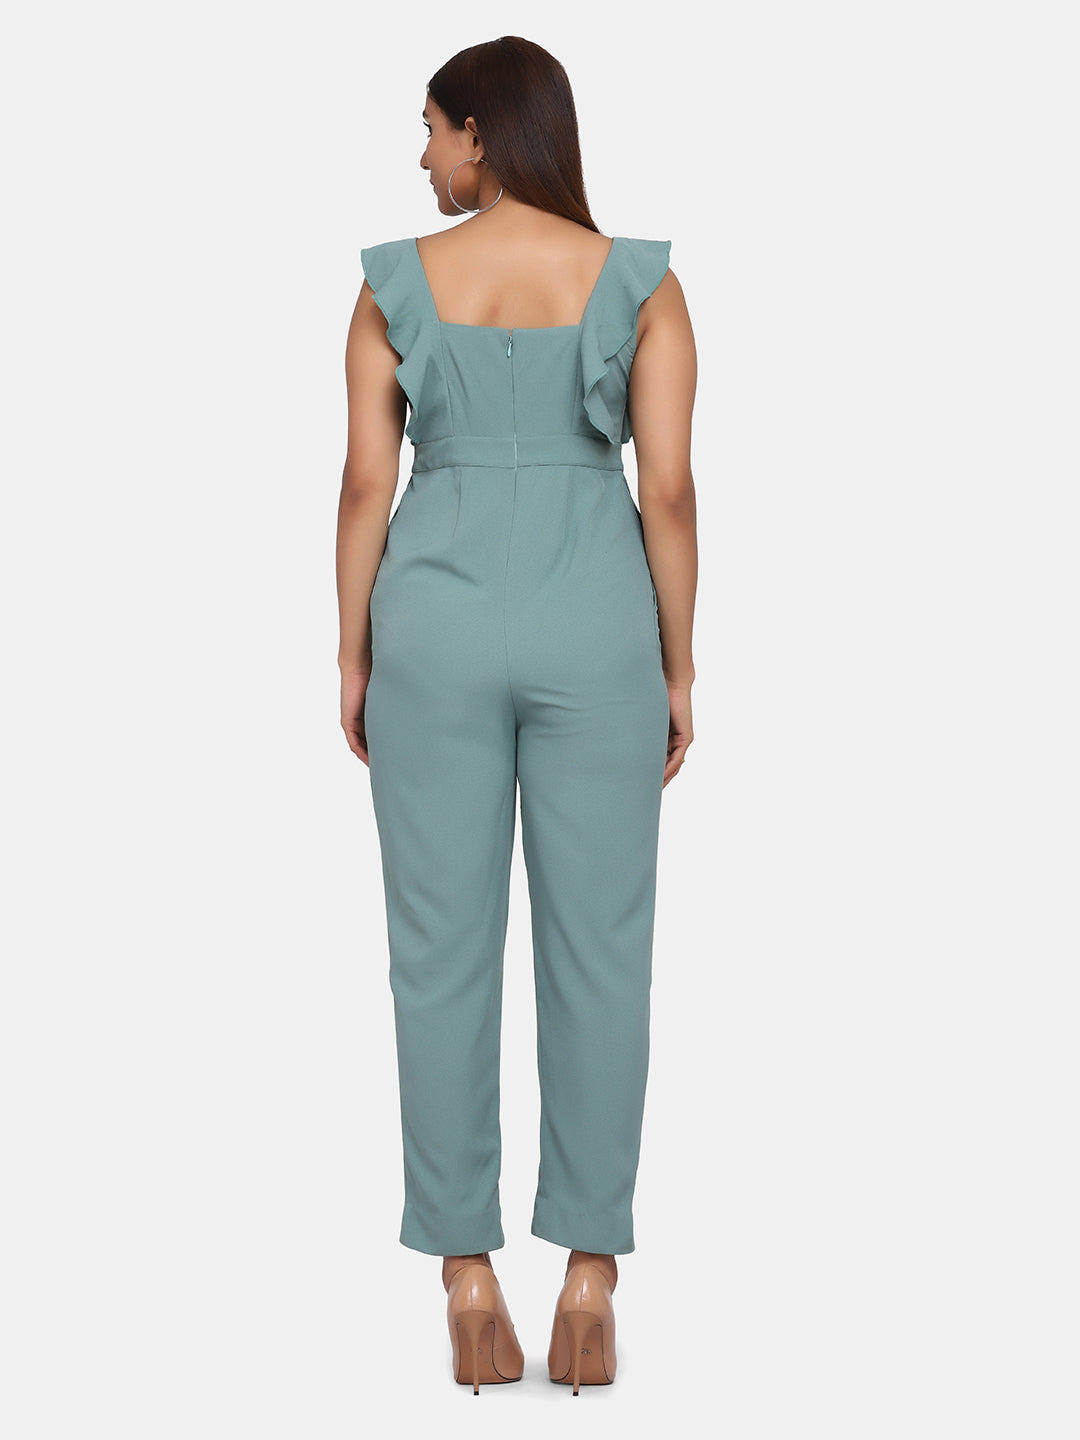 Ruffle Sleeve Stretch Jumpsuit for Women - Sage Green